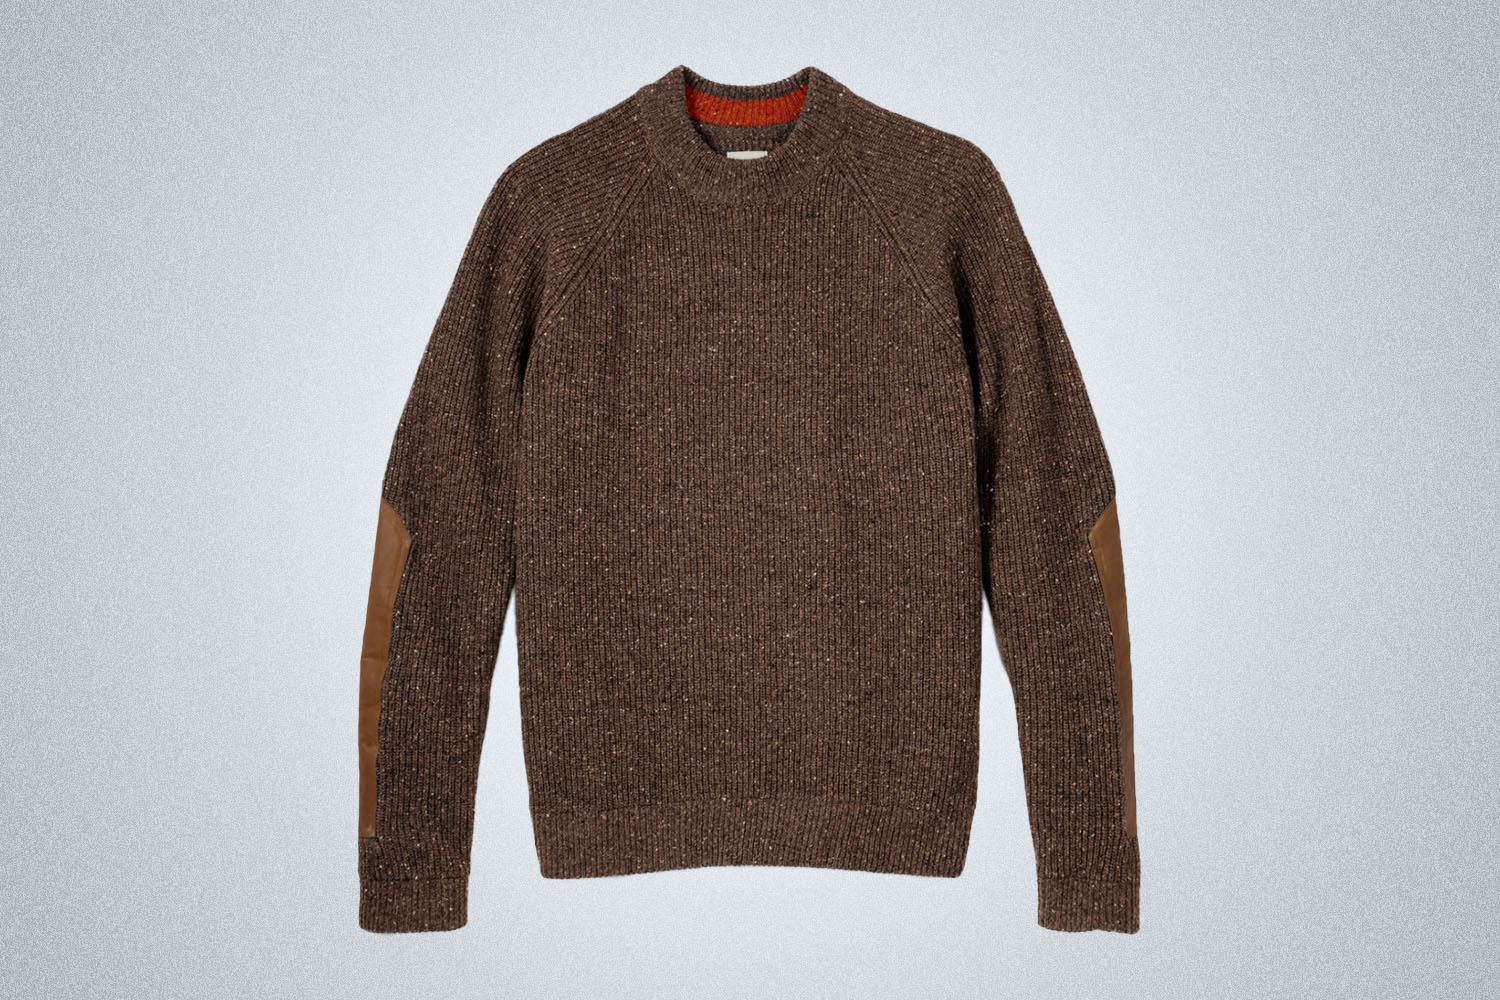 a brown sweater on a grey background